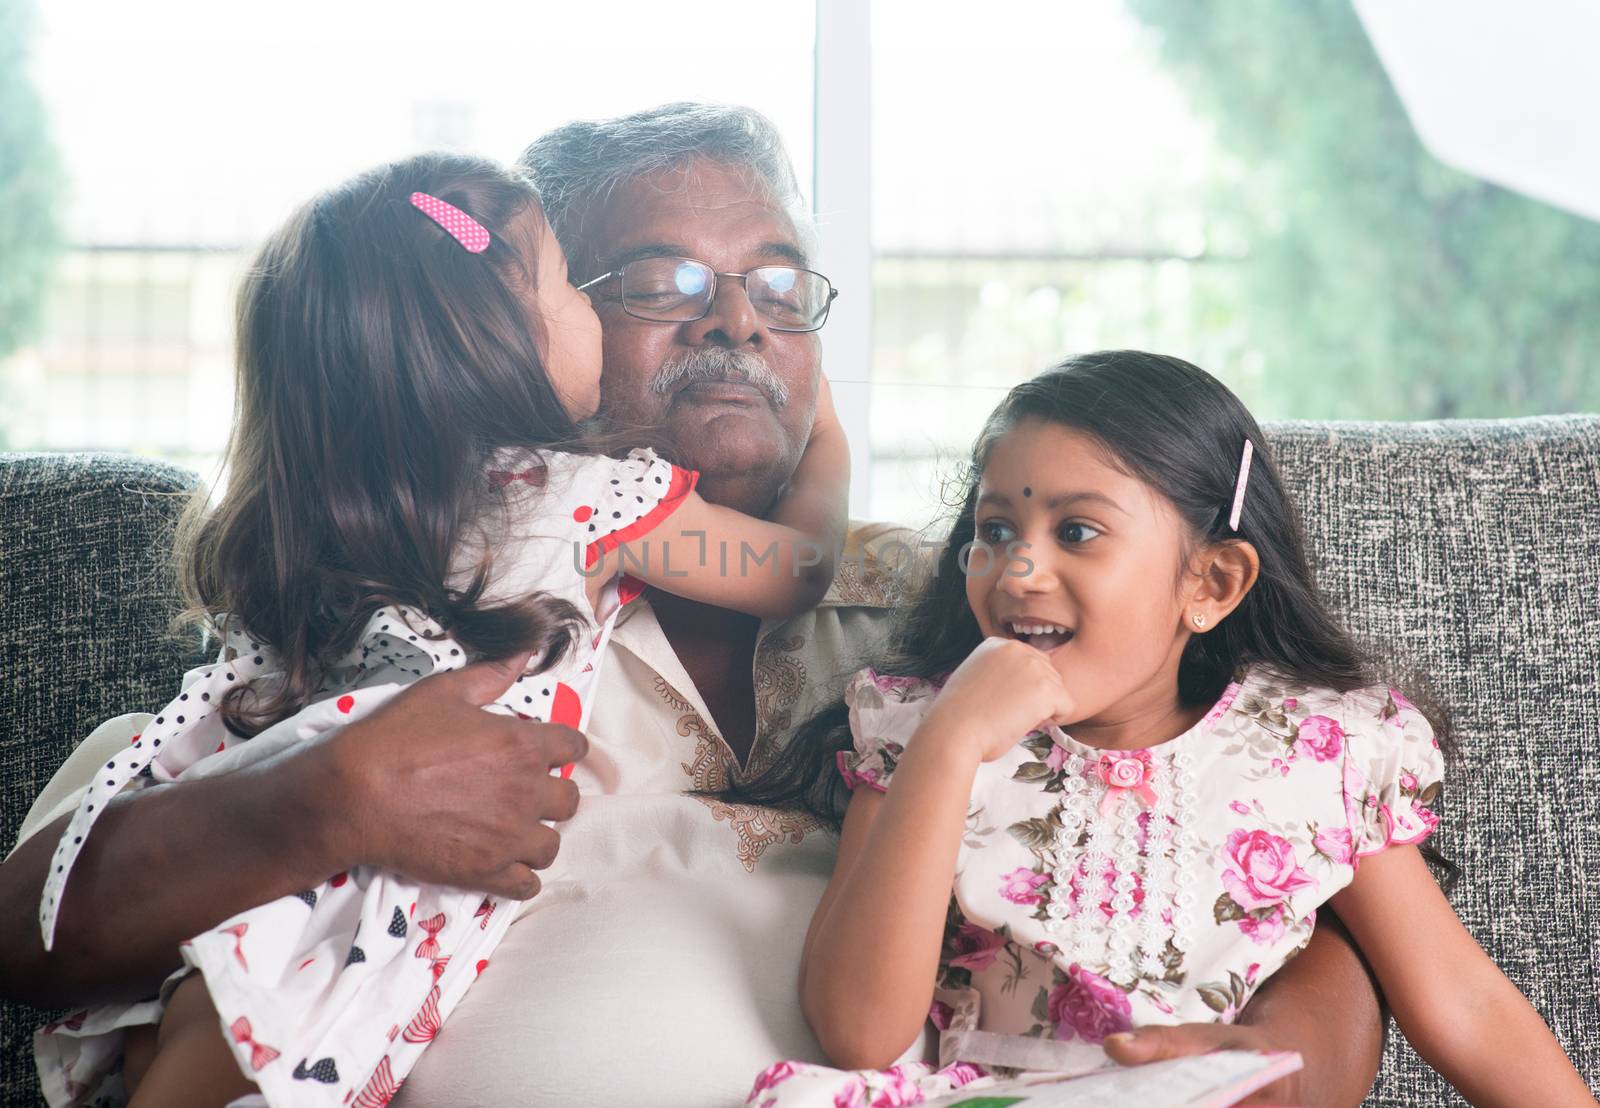 Portrait of happy Indian family at home. Grandchild kissing grandparent. Grandfather and granddaughters. Asian people living lifestyle.